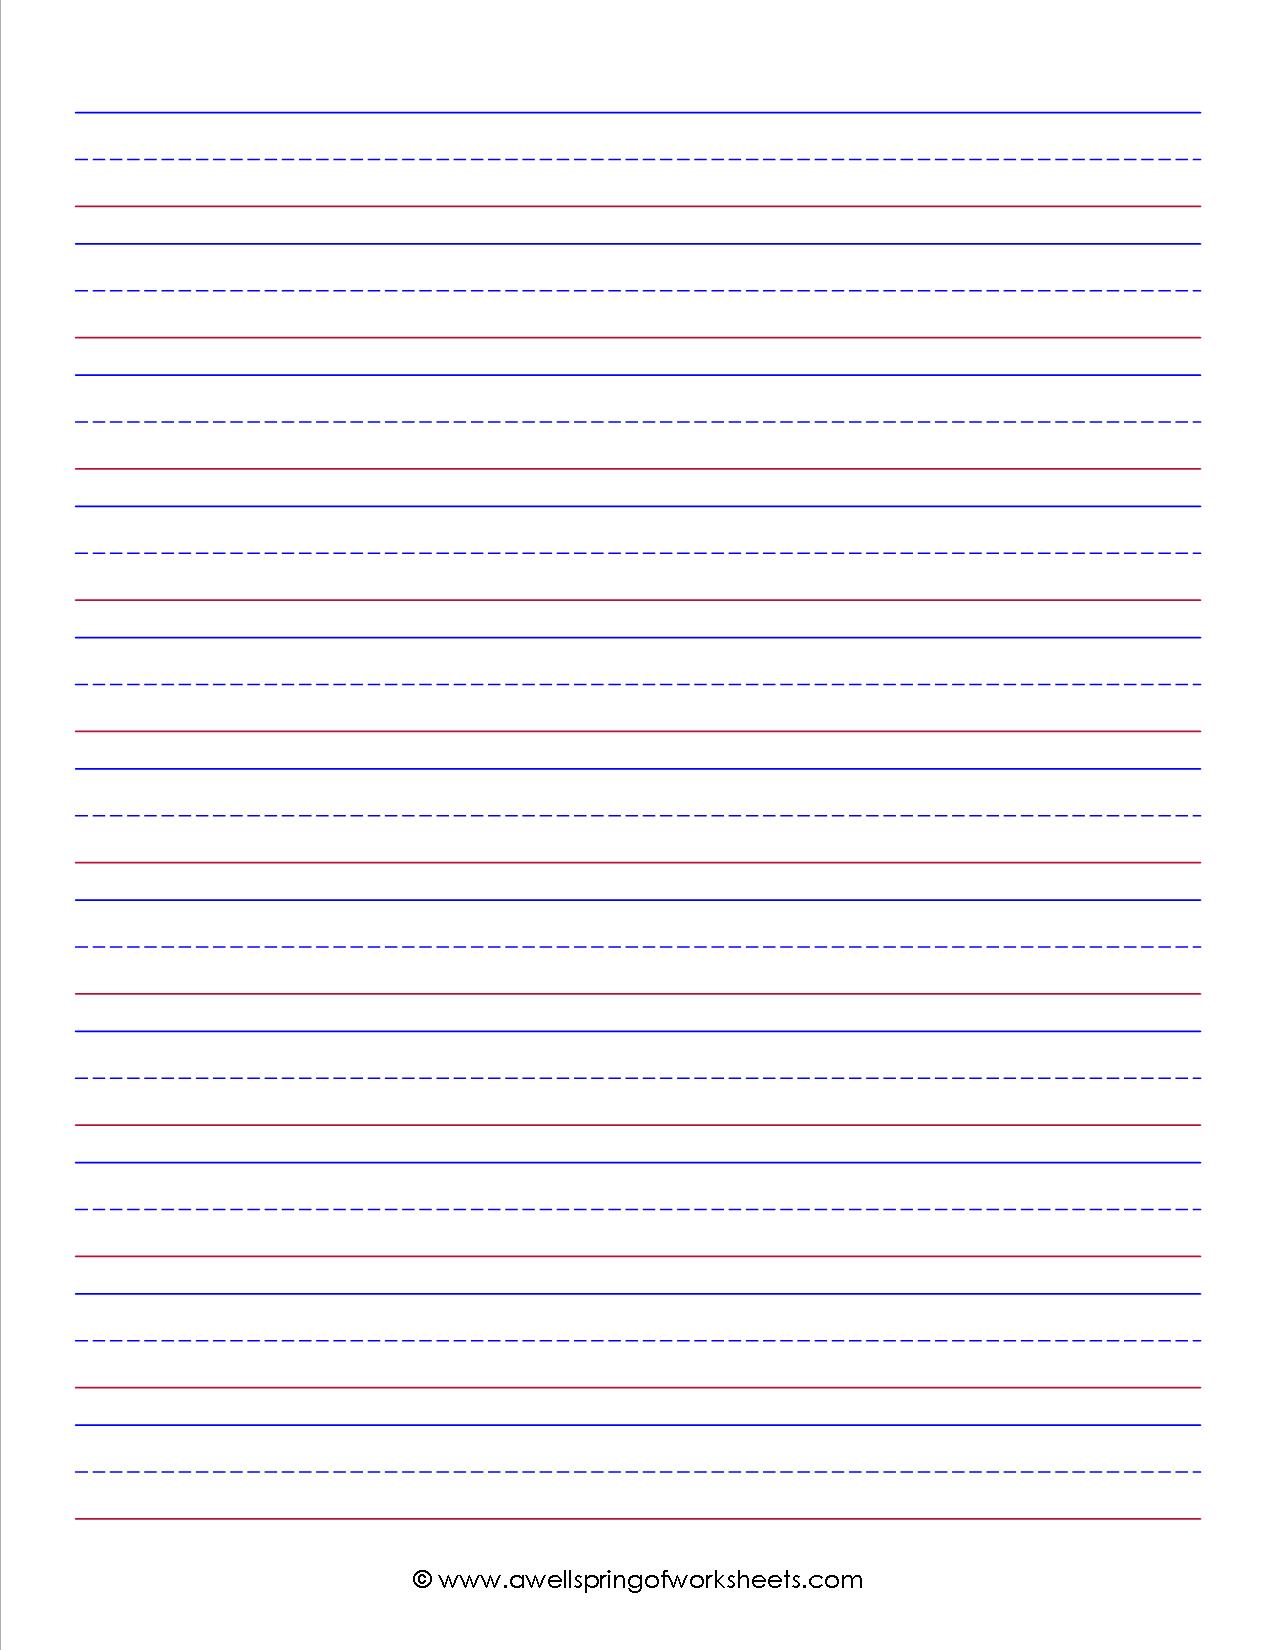 Free Printable Primary Lined Writing Paper Get What You Need